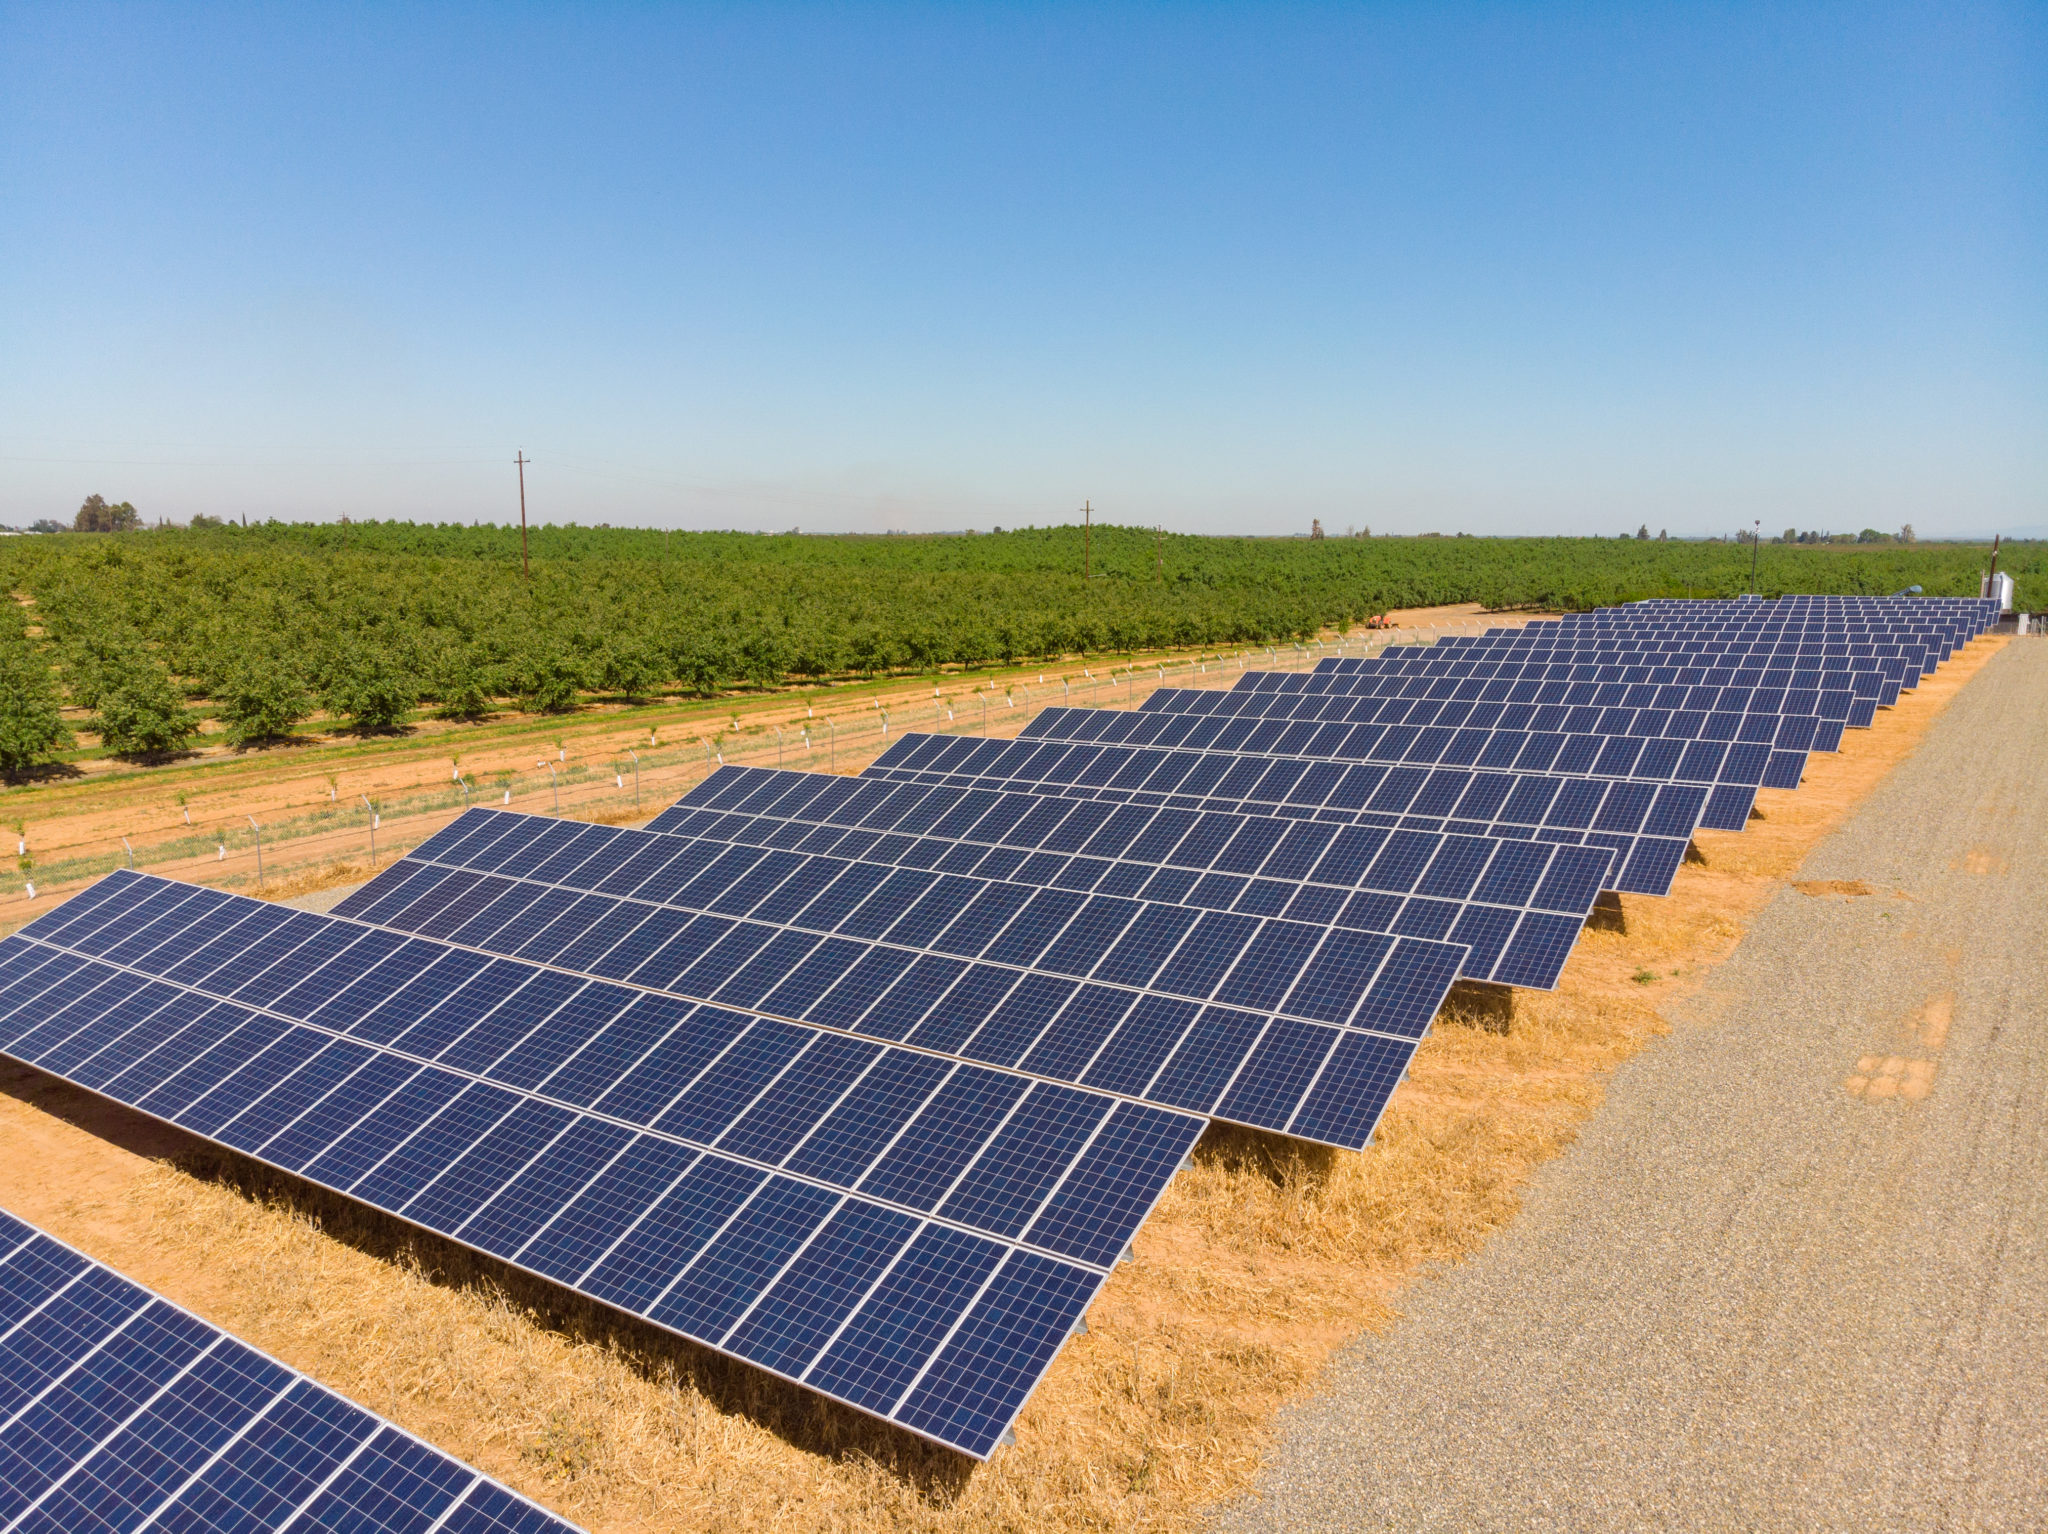 A small solar farm in Gustine, California with rows of crops in the background and a blue sky.